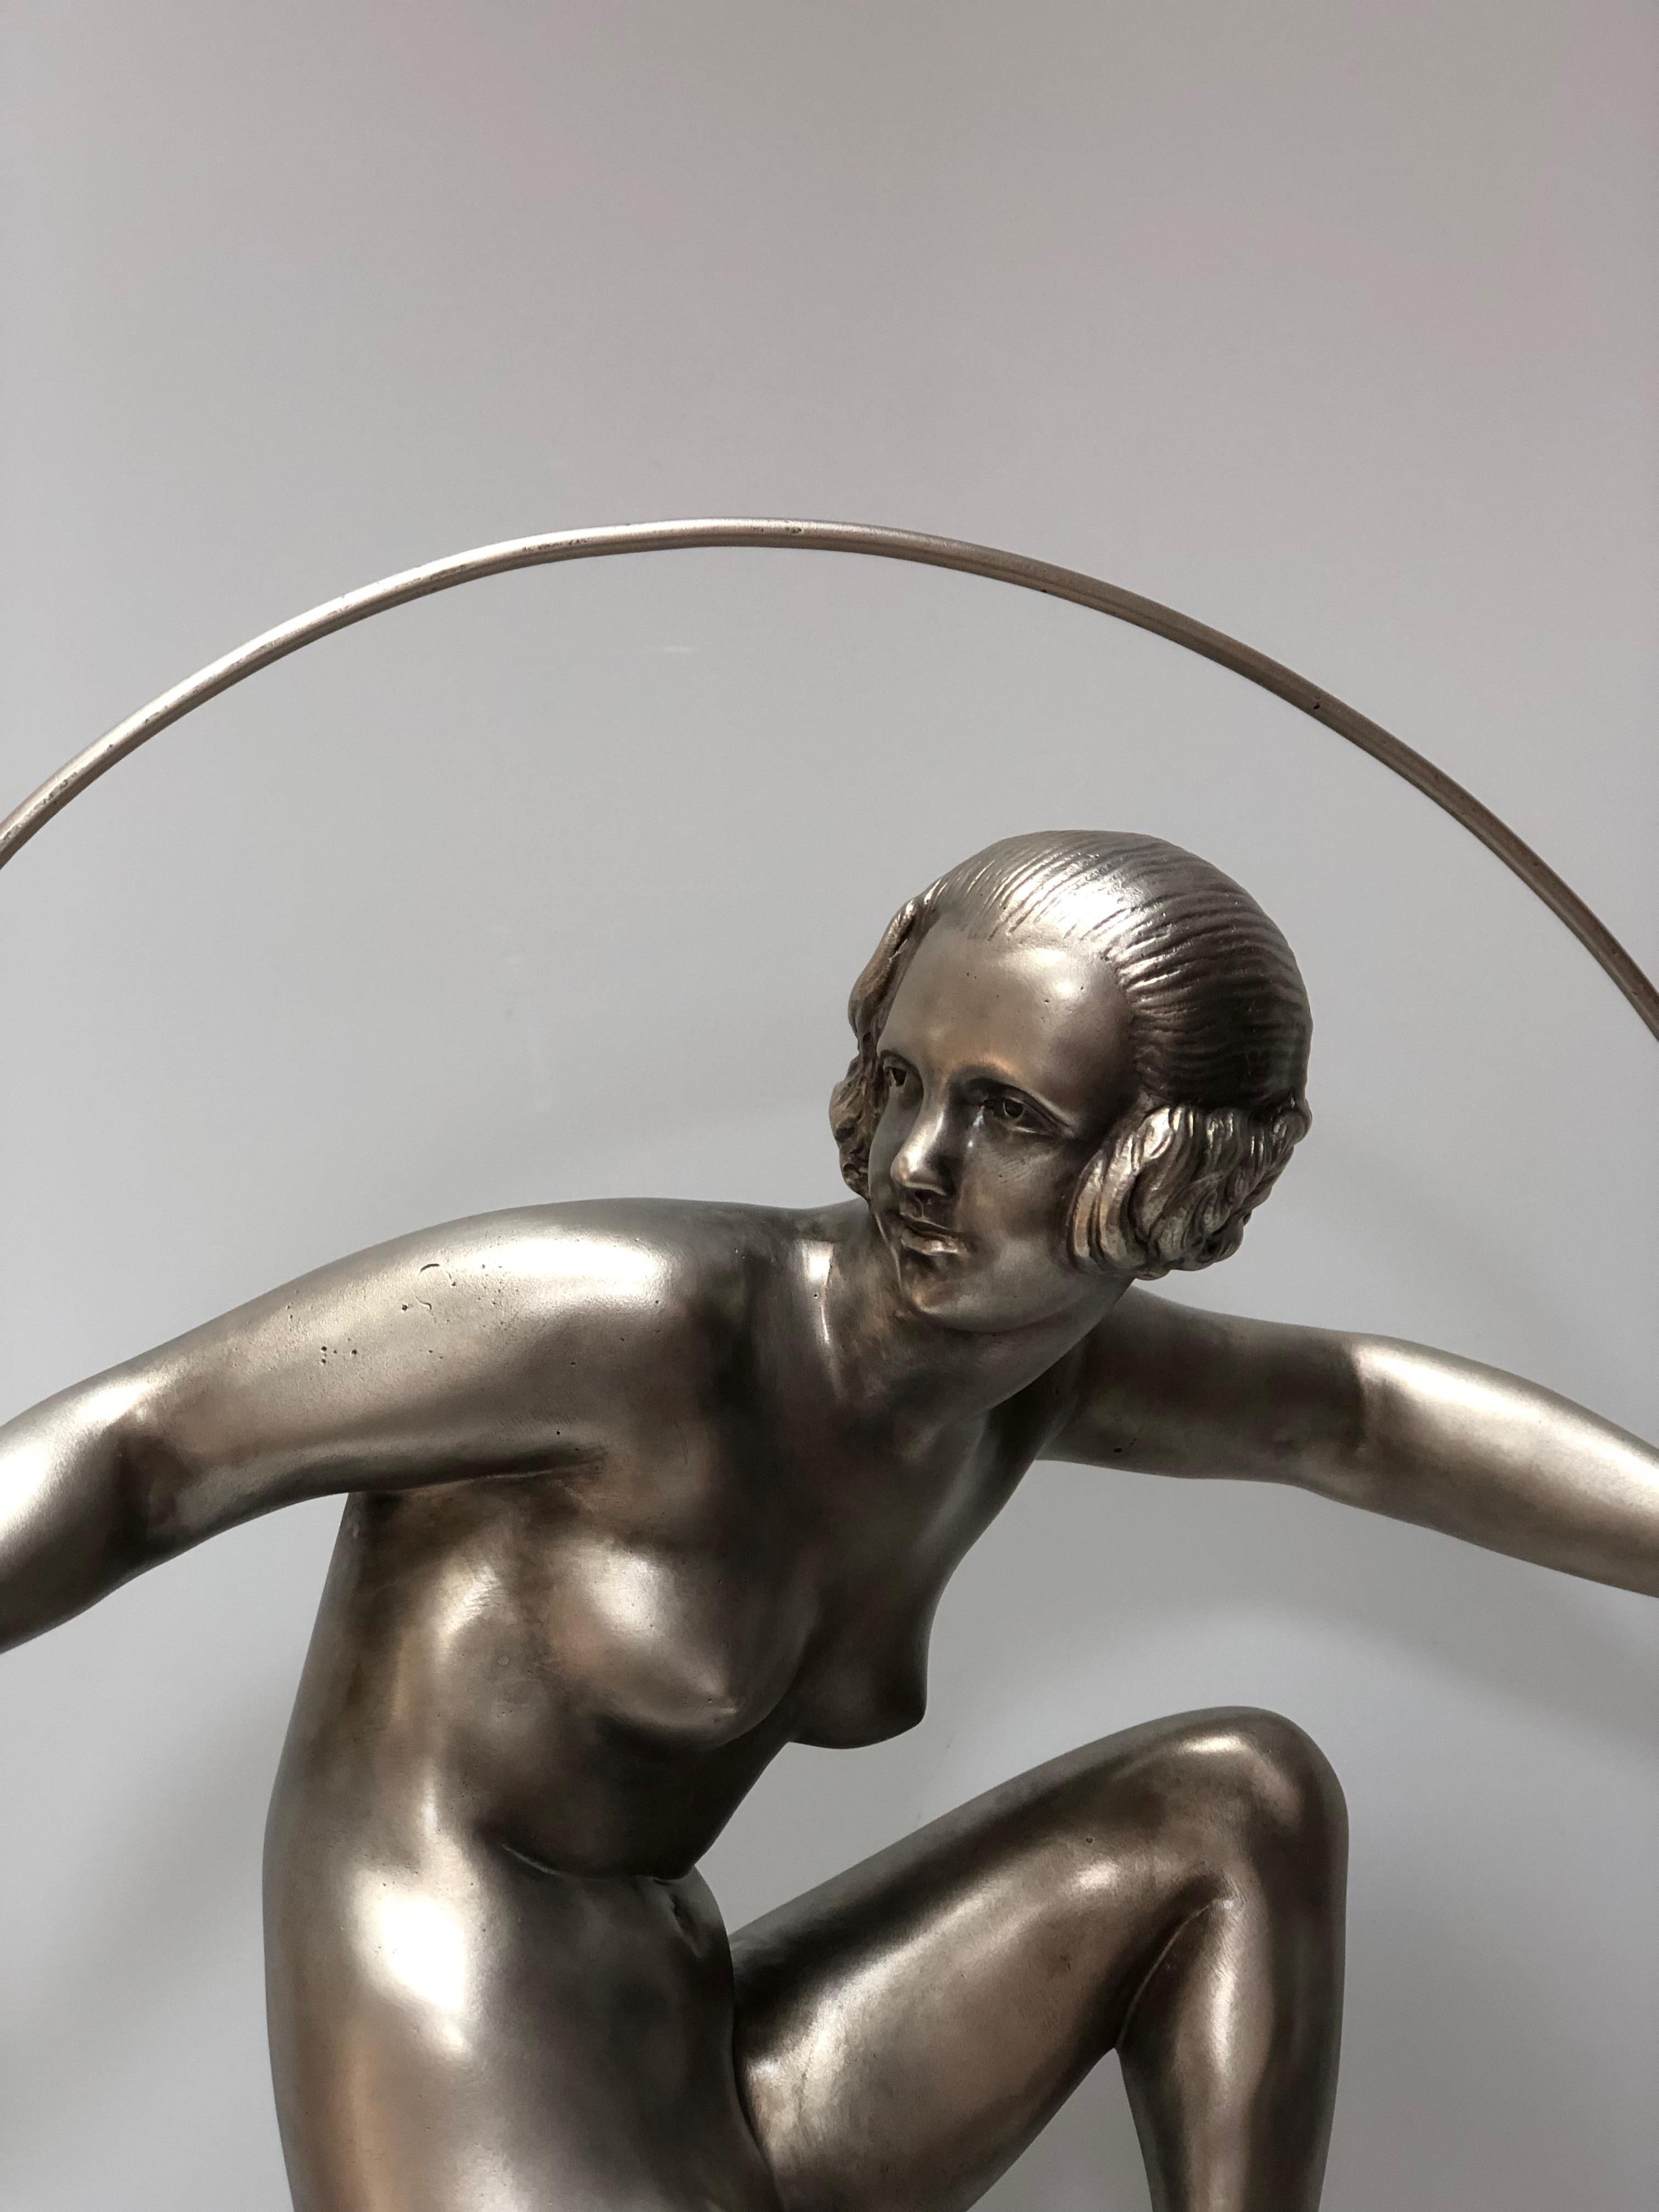 Silvered bronze on art deco marble base circa 1930.
Dancer with a hoop, signed on Bourraine marble.
In perfect condition.
Total height: 50 cm
Dancer height: 31 cm
Base width: 12 cm
Base length: 12 cm
Weight: 7 Kg

Born in 1886 in Pontoise, France,